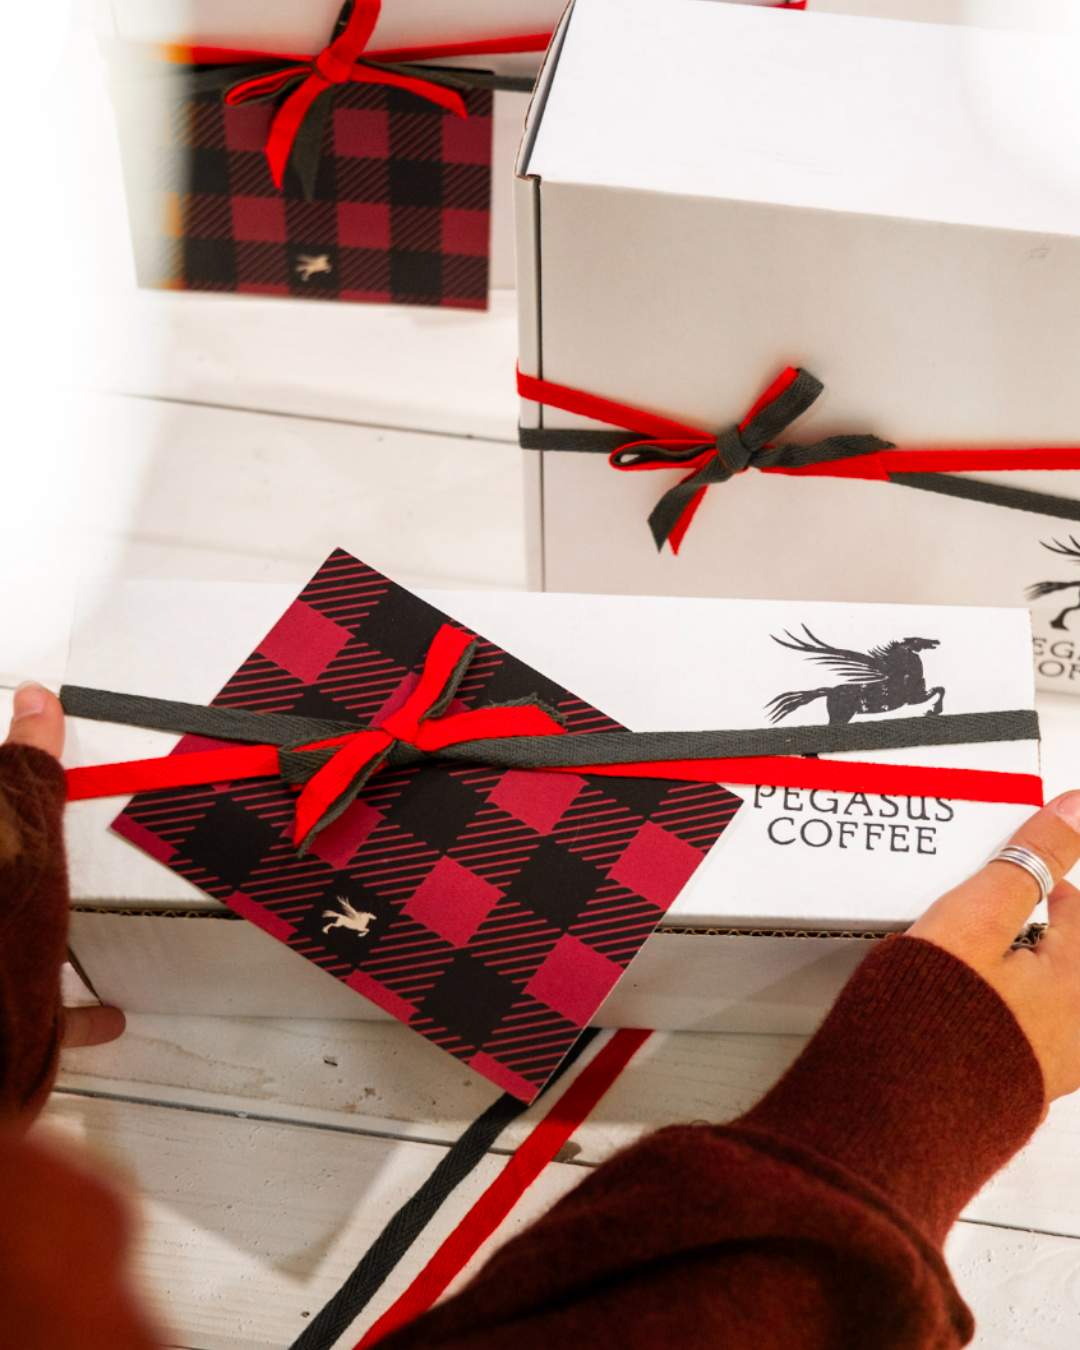 Pegasus Coffee Gift Box comes wrapped in ribbon with a handwritten card